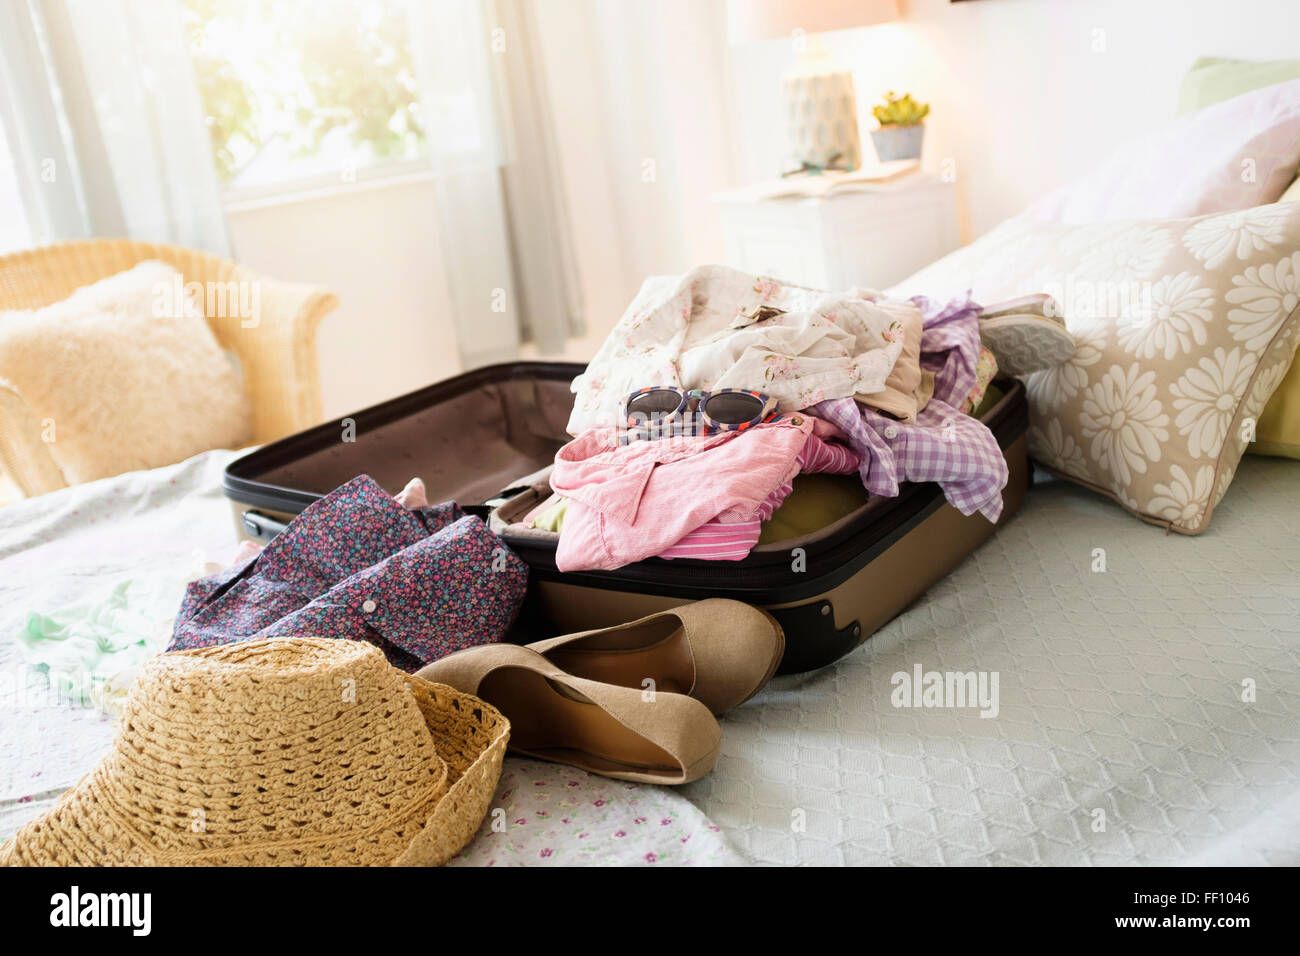 Messy suitcase on bed Stock Photo